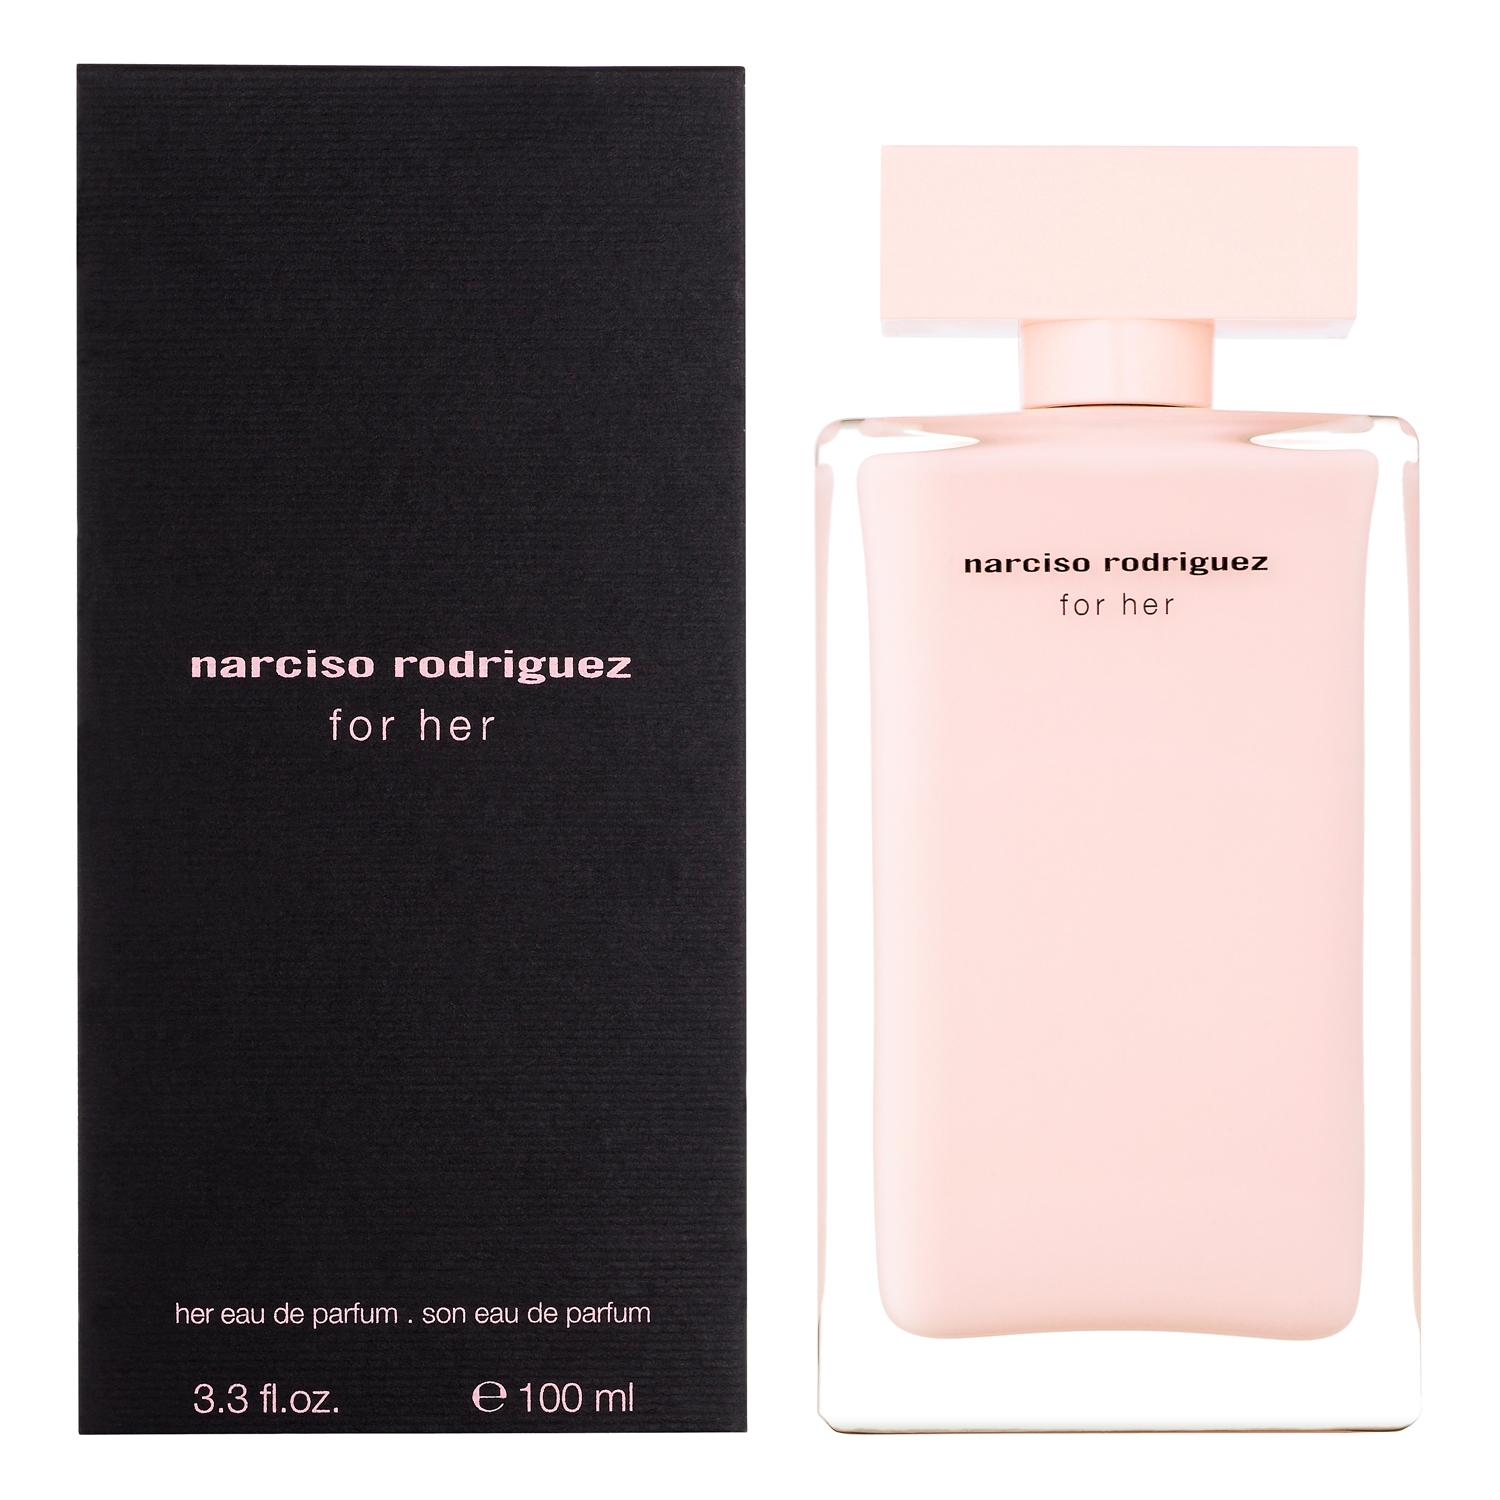 Narciso Rodriguez for her edp L